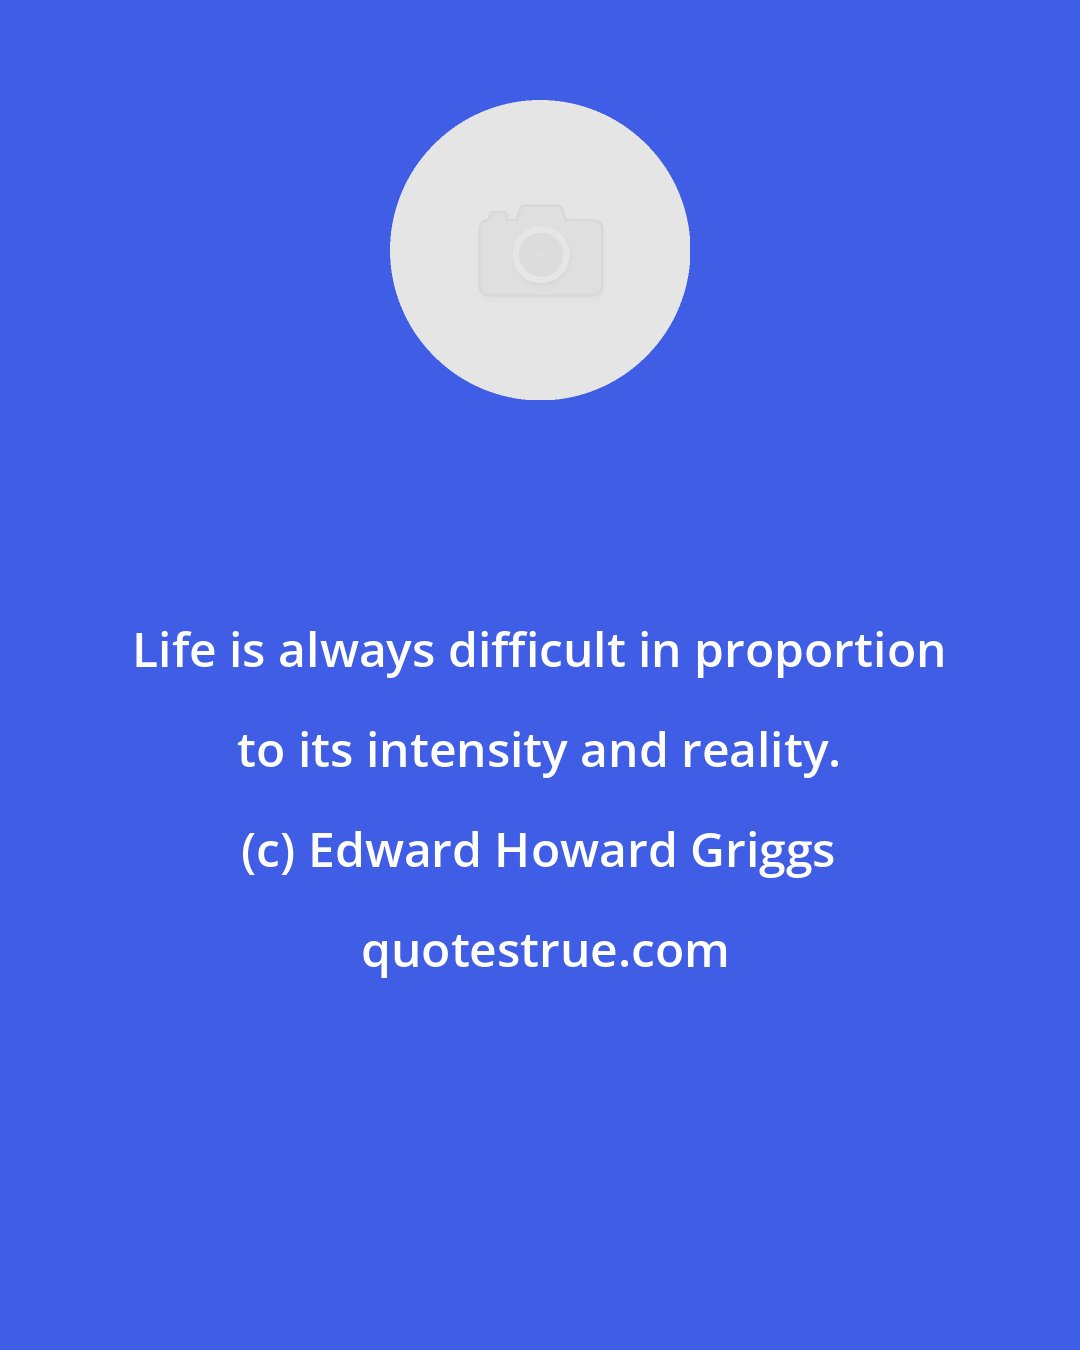 Edward Howard Griggs: Life is always difficult in proportion to its intensity and reality.